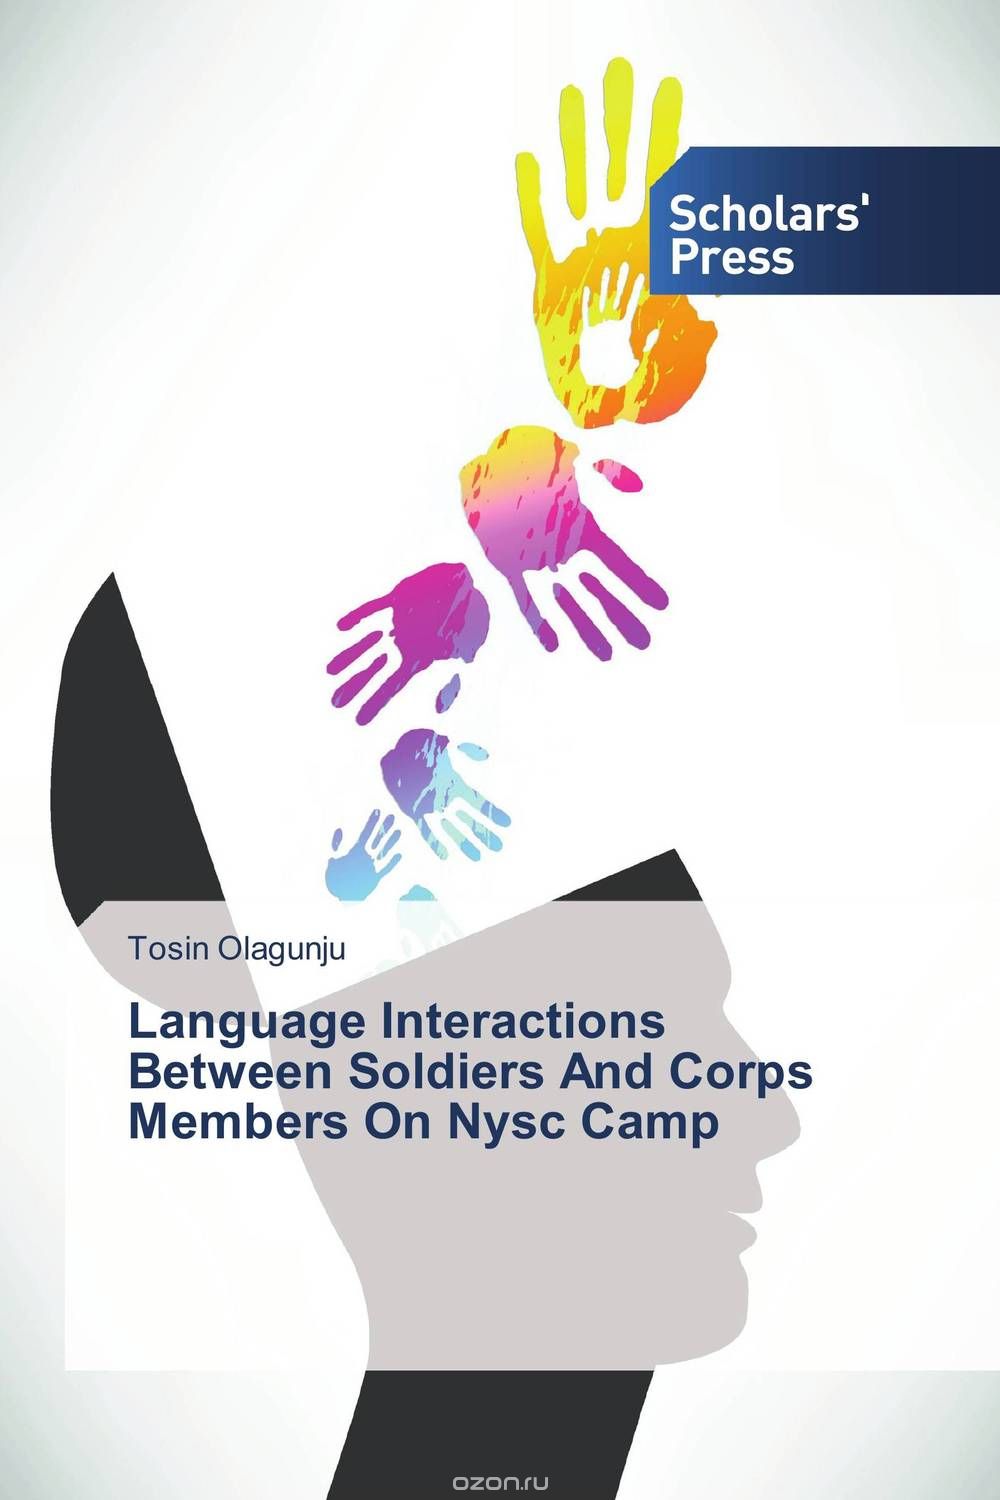 Скачать книгу "Language Interactions Between Soldiers And Corps Members On Nysc Camp"